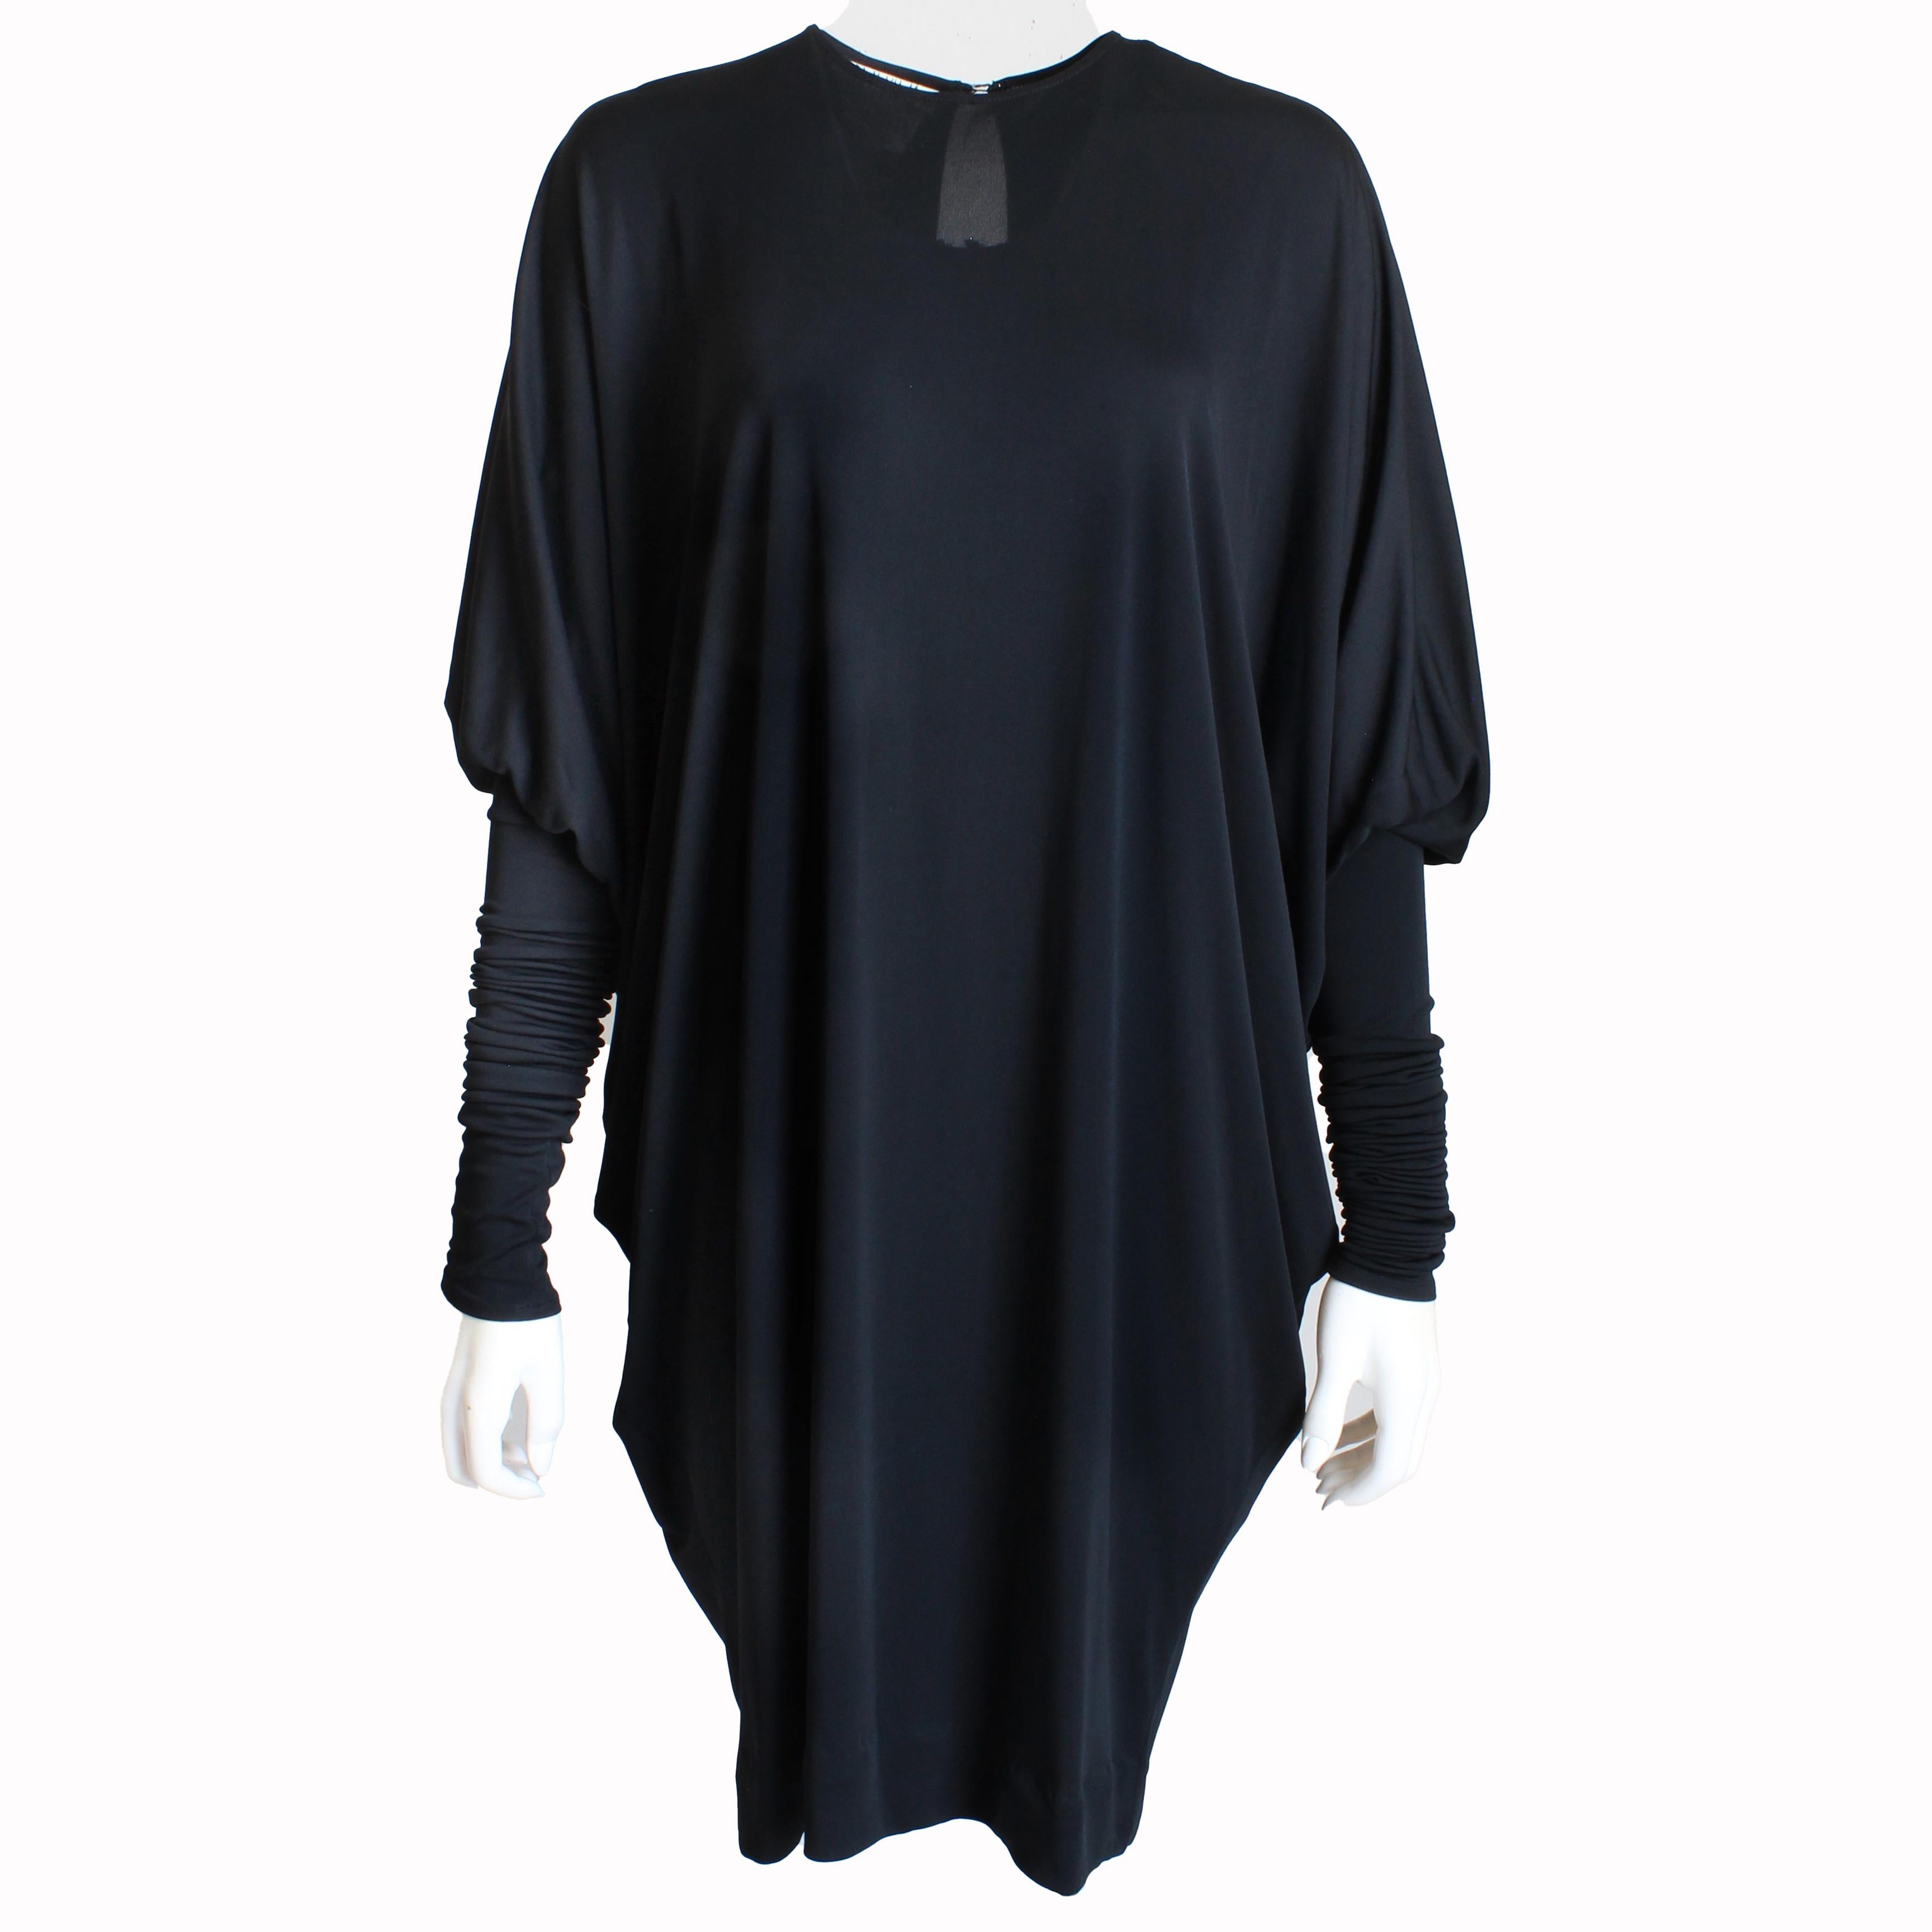 Preowned, vintage dress by the fabulous Norma Kamali, likely made in the 1980s.  Made from black crepe fabric (no content label), it features Dolman or batwing top sleeves and fitted stretchy tube sleeves that can be scrunched up or down to achieve